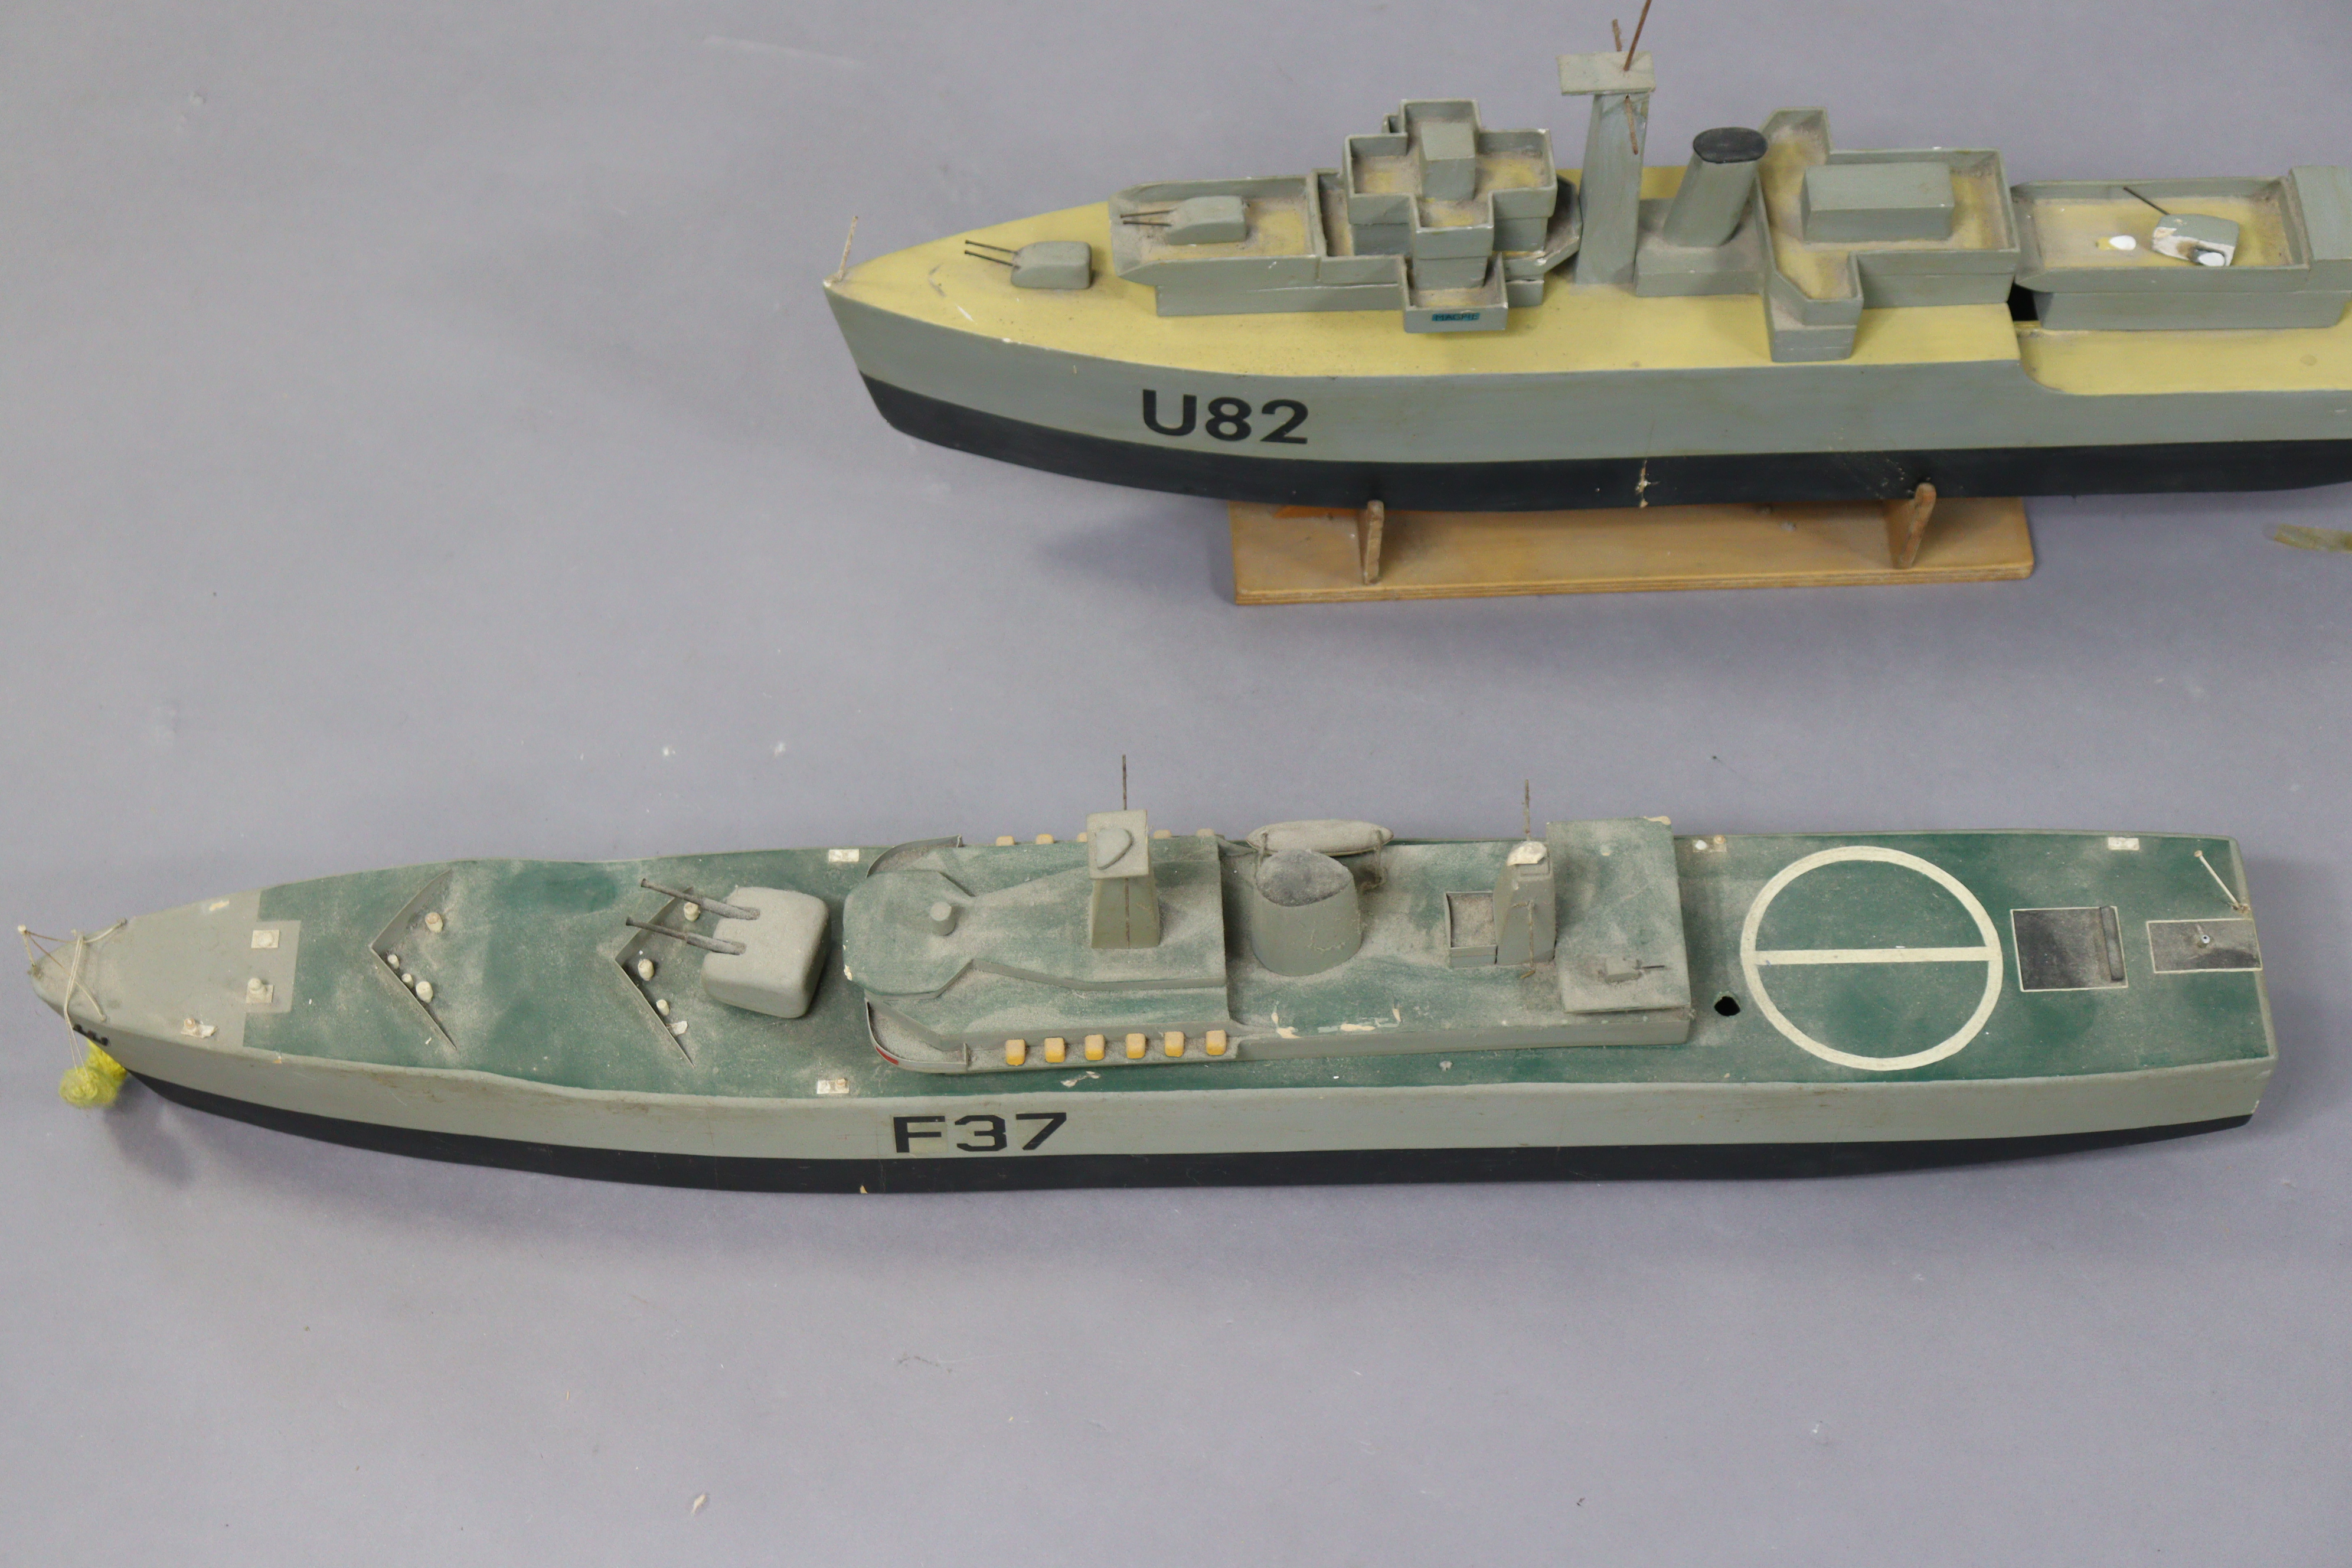 Two painted fibreglass models of warships “F37” 75cm long, and “V82” 70cm long. - Image 2 of 3